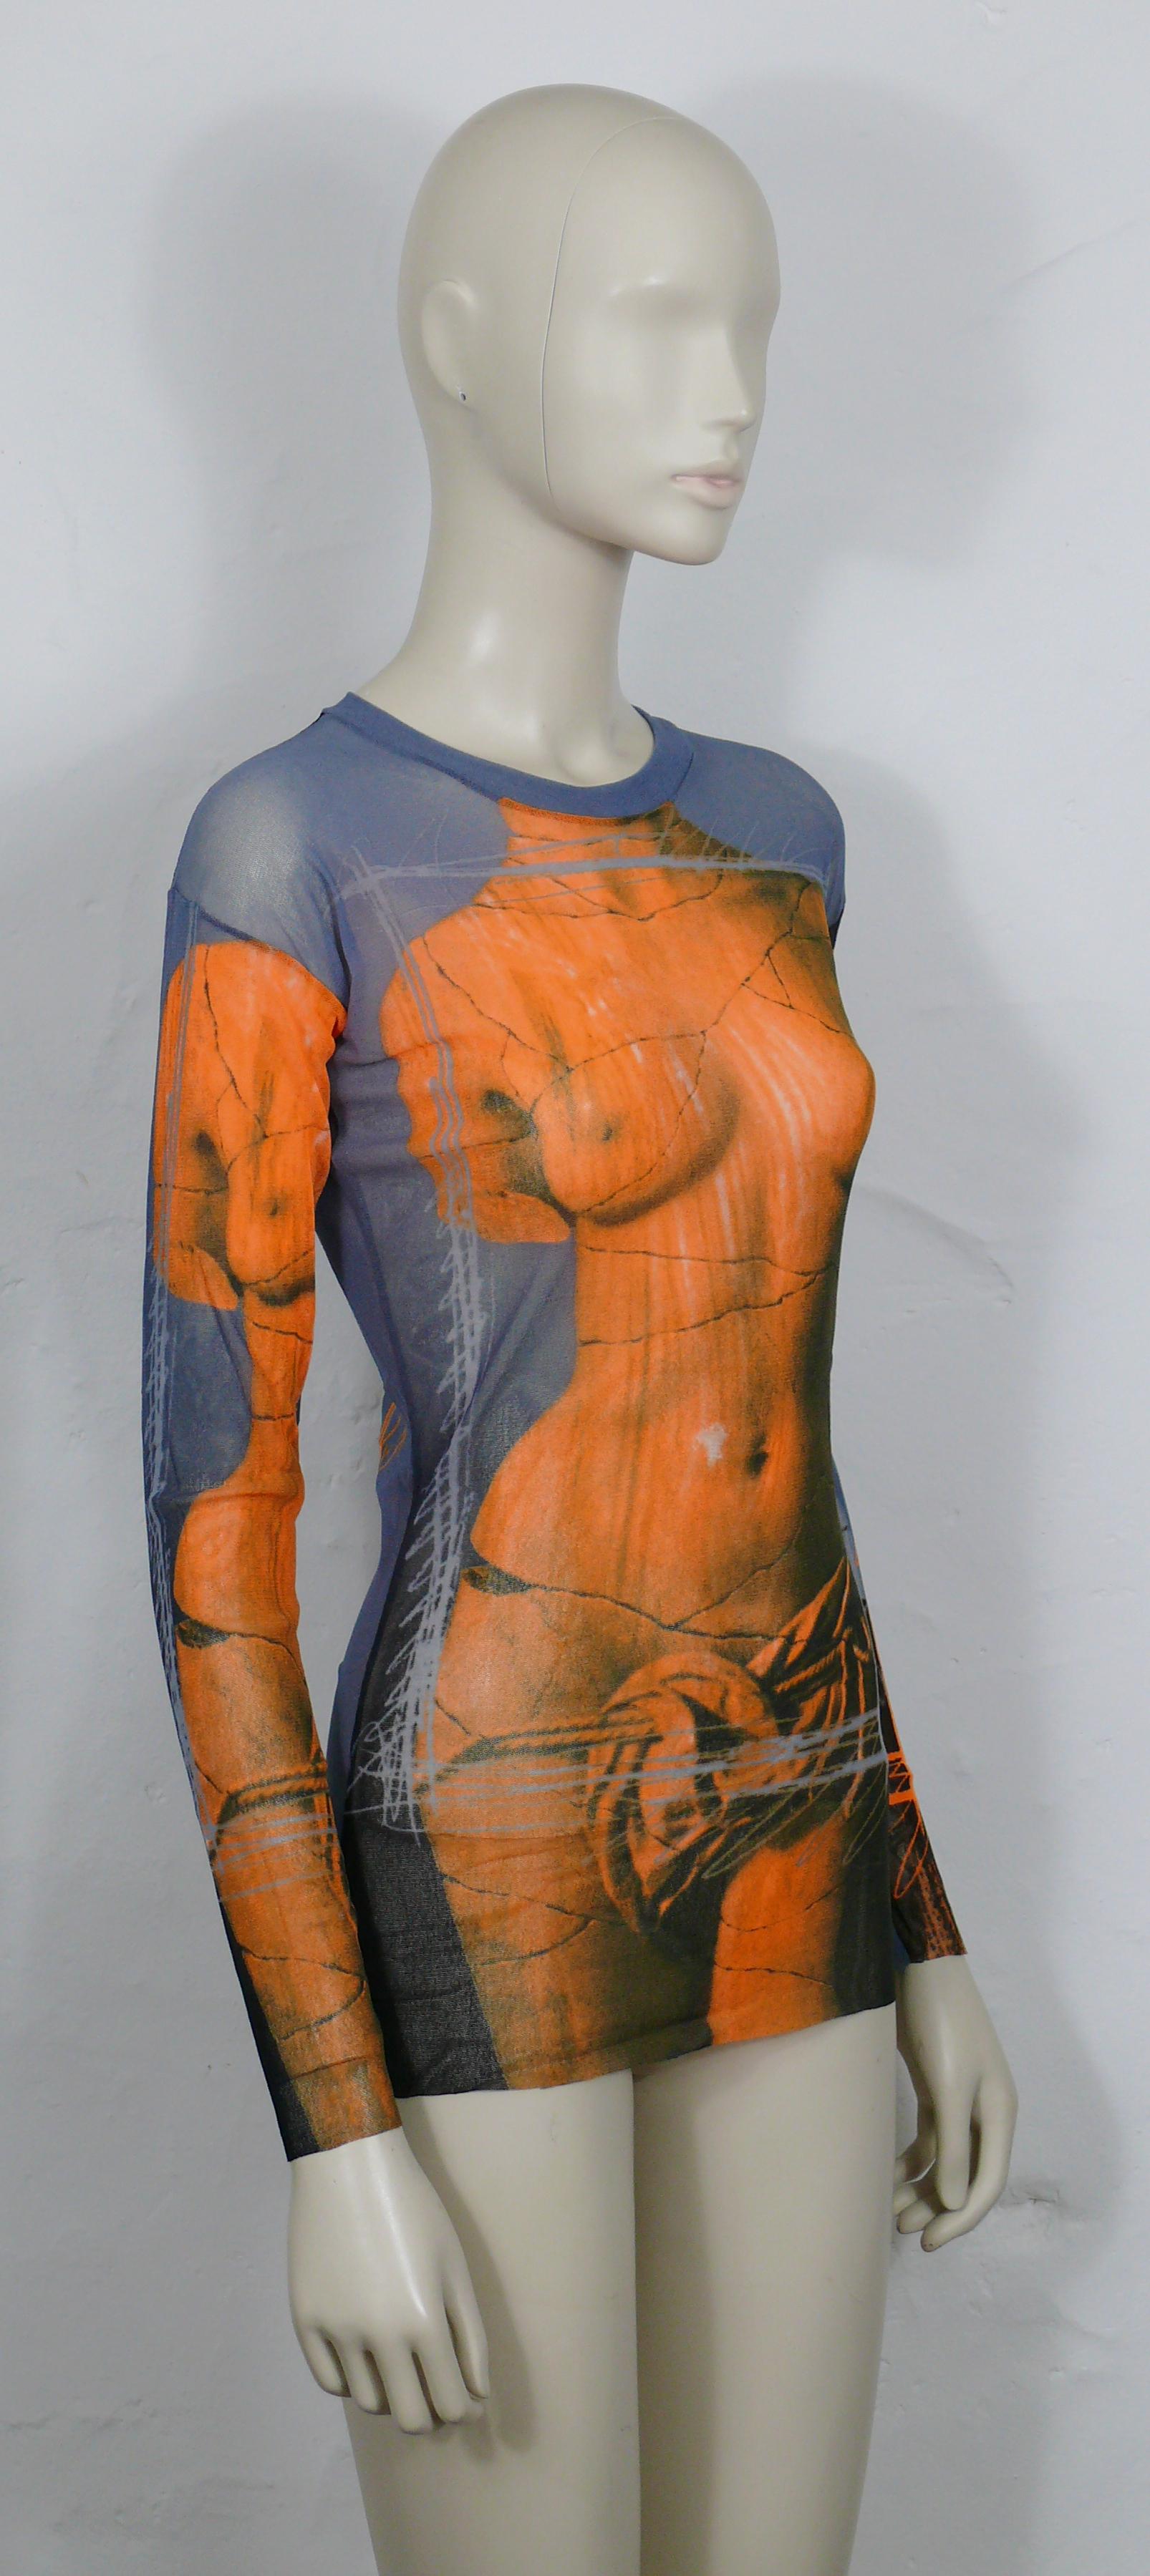 JEAN PAUL GAULTIER vintage iconic sheer mesh top featuring a multicolor Ancient Greek Venus bust print.

Label reads JEAN PAUL GAULTIER MAILLE Made in Italy.

Missing size tag.
Please refer to measurements.

Composition label reads : 100%